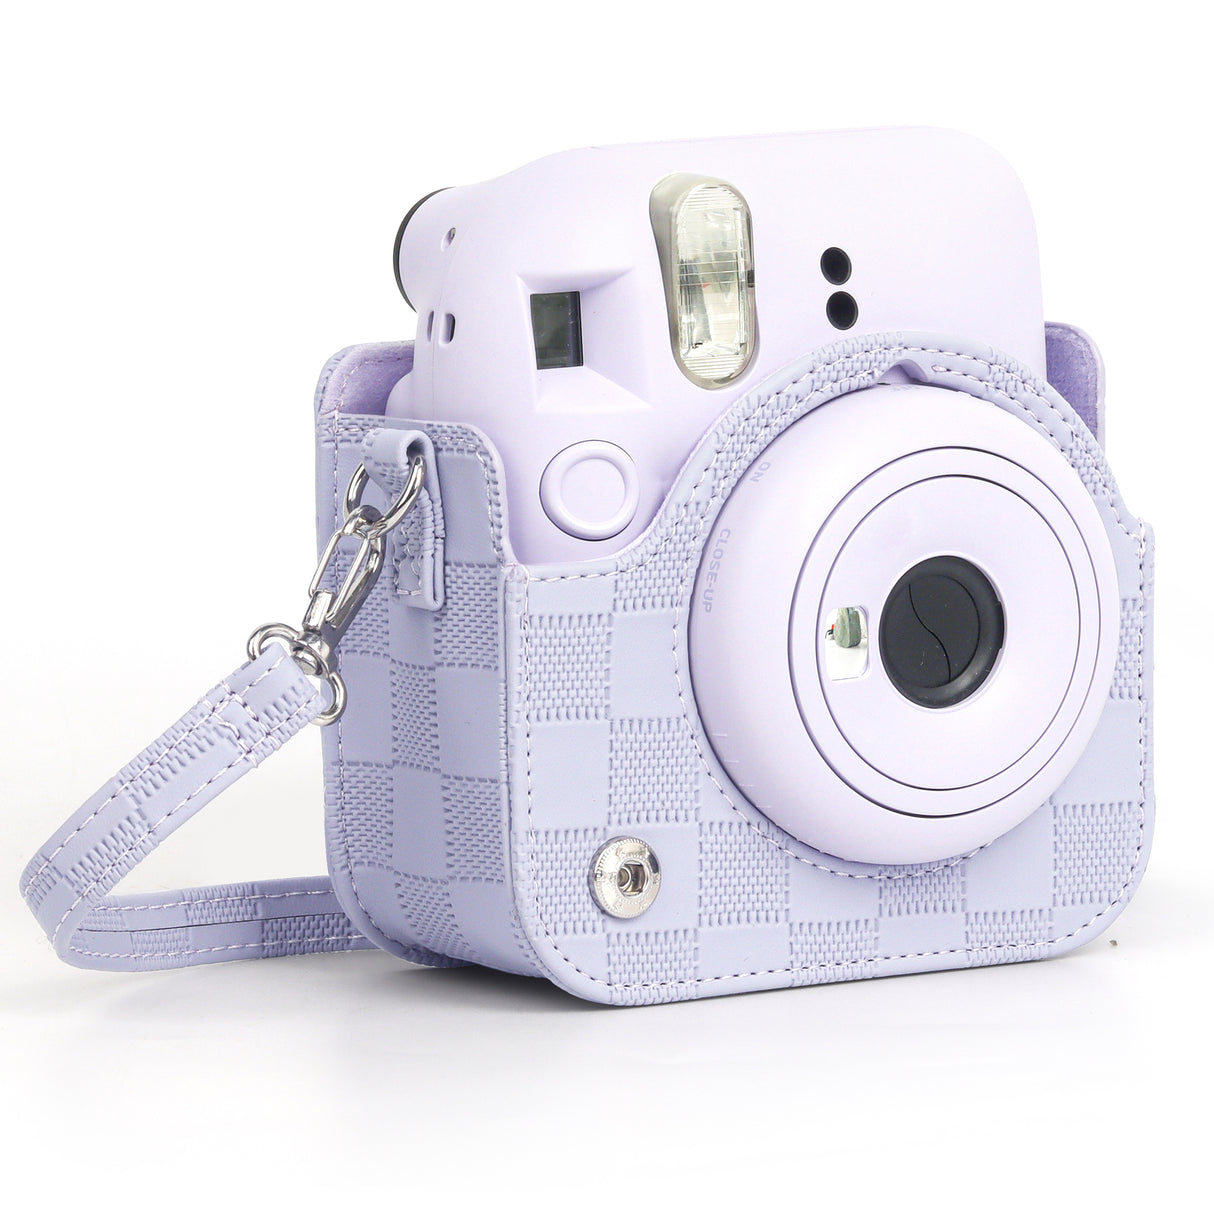 Zikkon Instax Mini 12 Protective Camera Case PU Leather Checkerboard Style Carrying Bag Purple